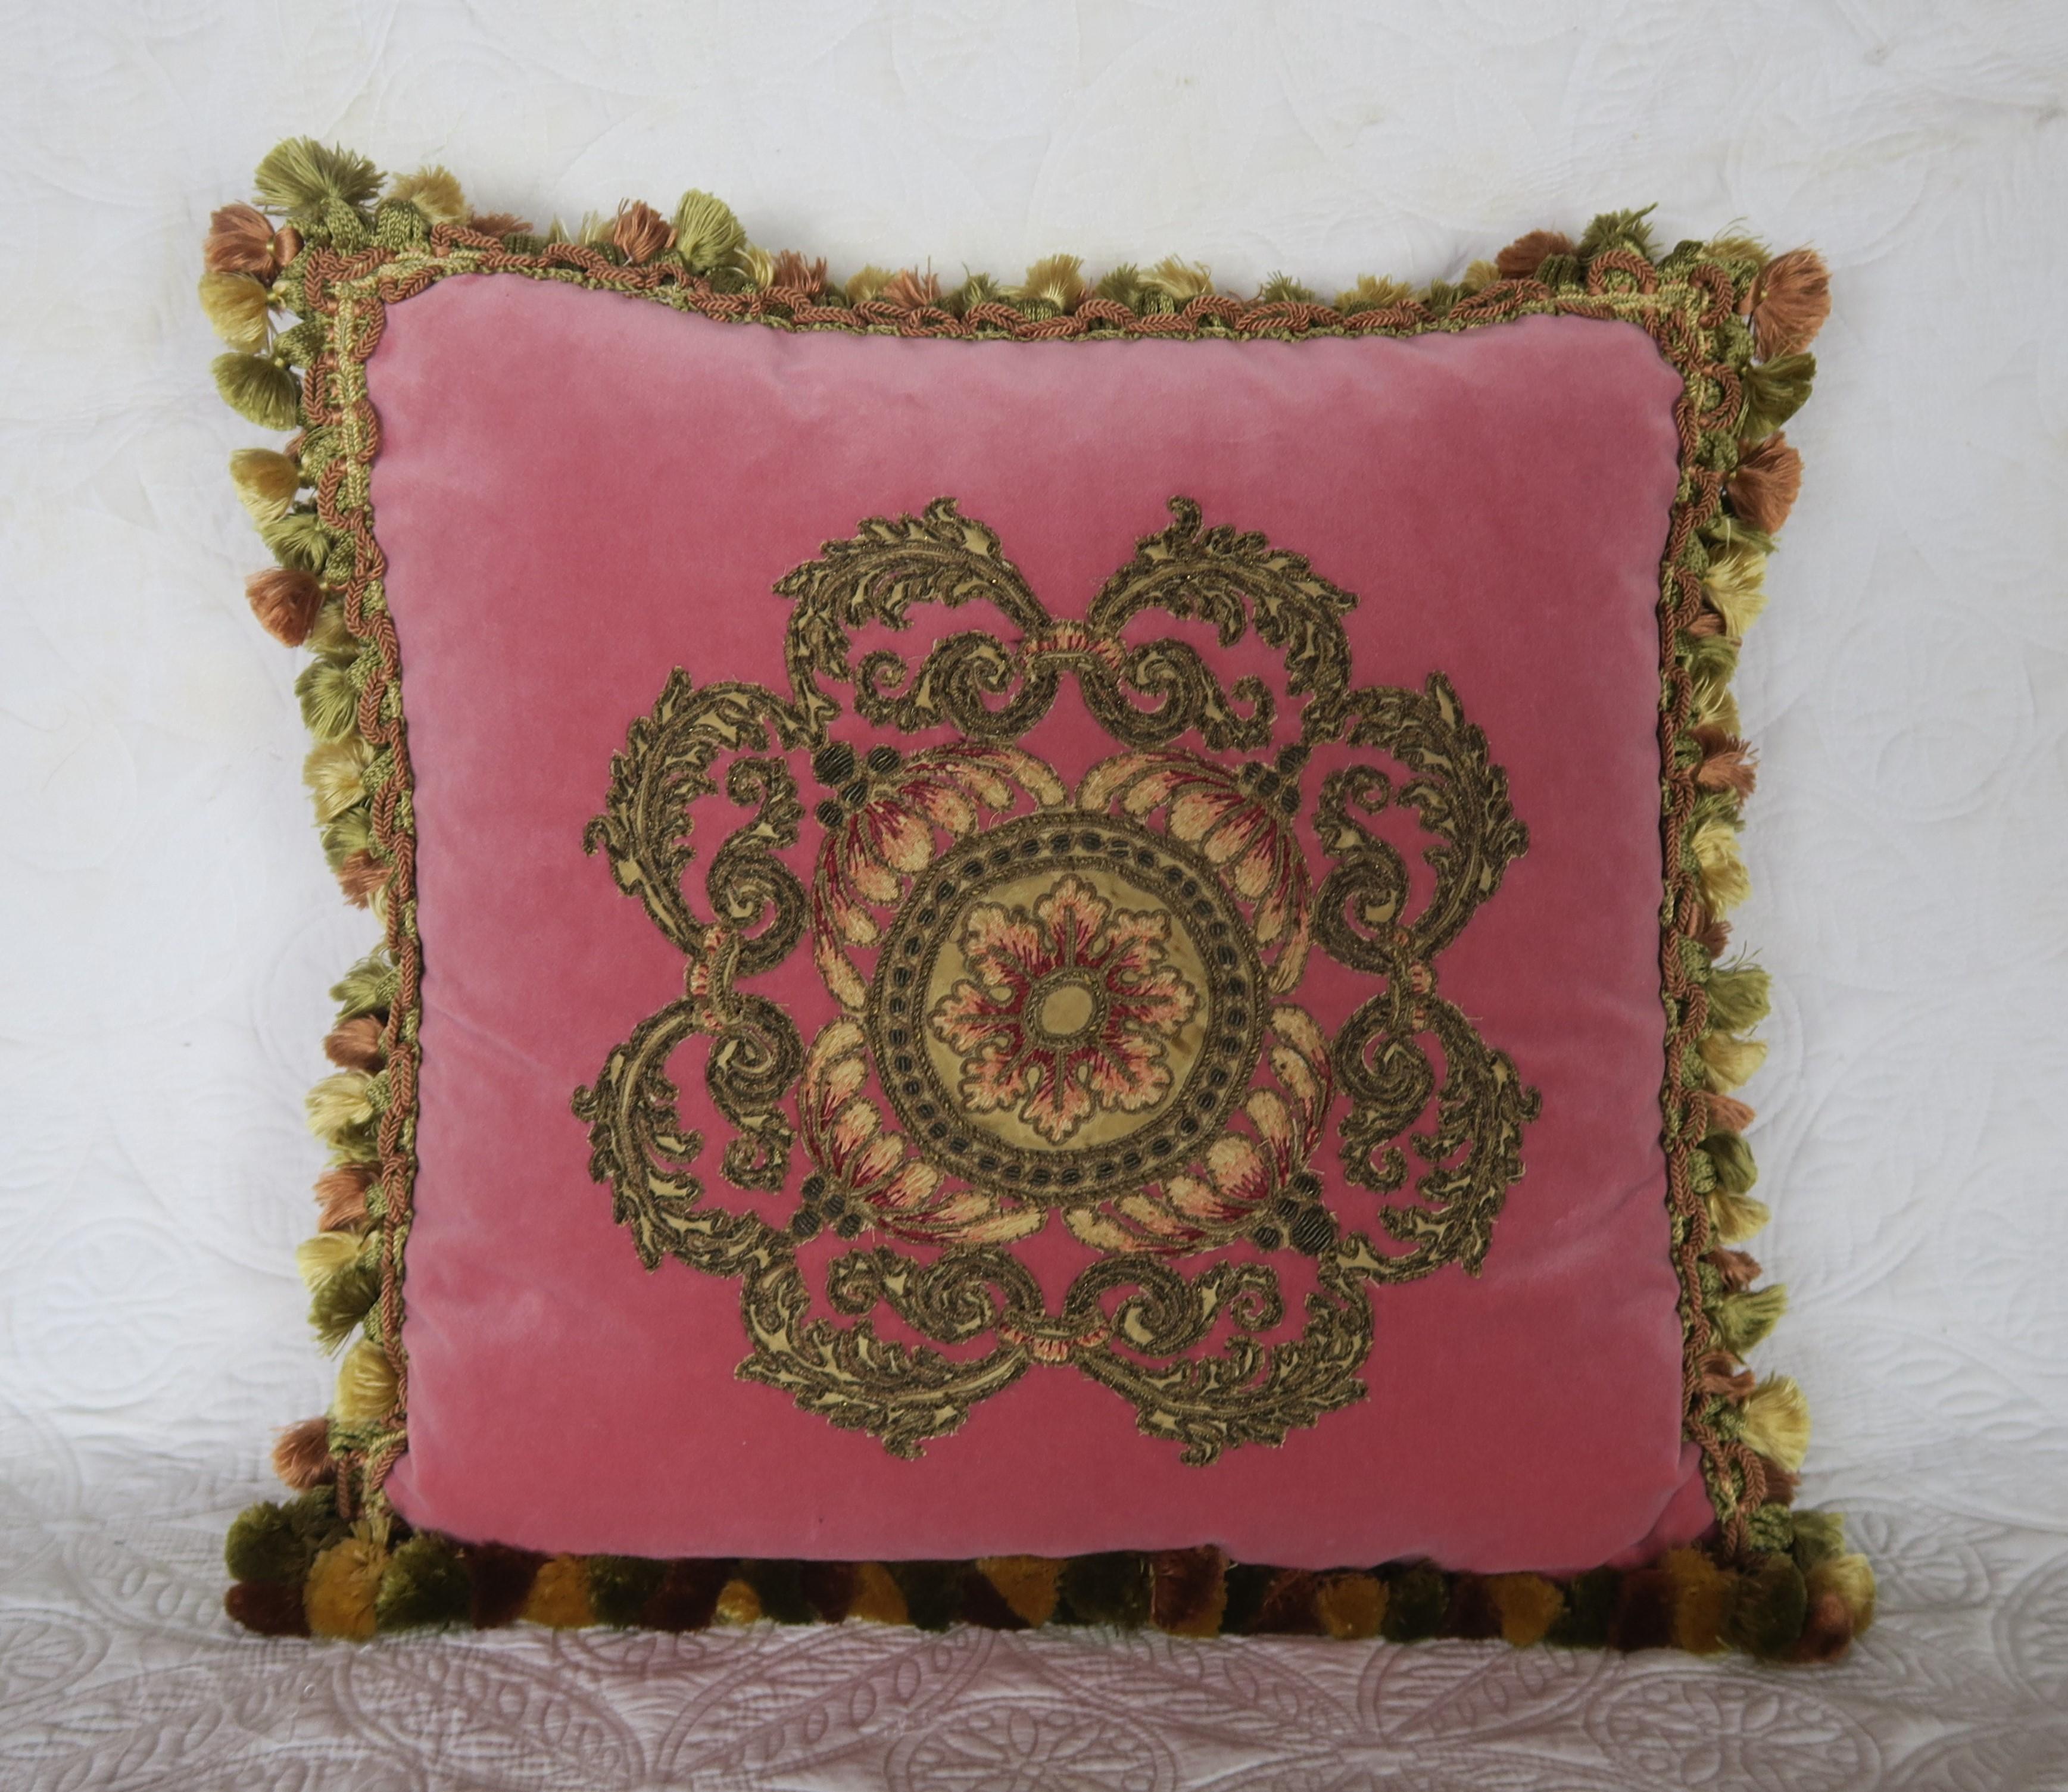 Pair of 19th Century French Appliqued Pink Velvet Pillows by Melissa Levinson 1